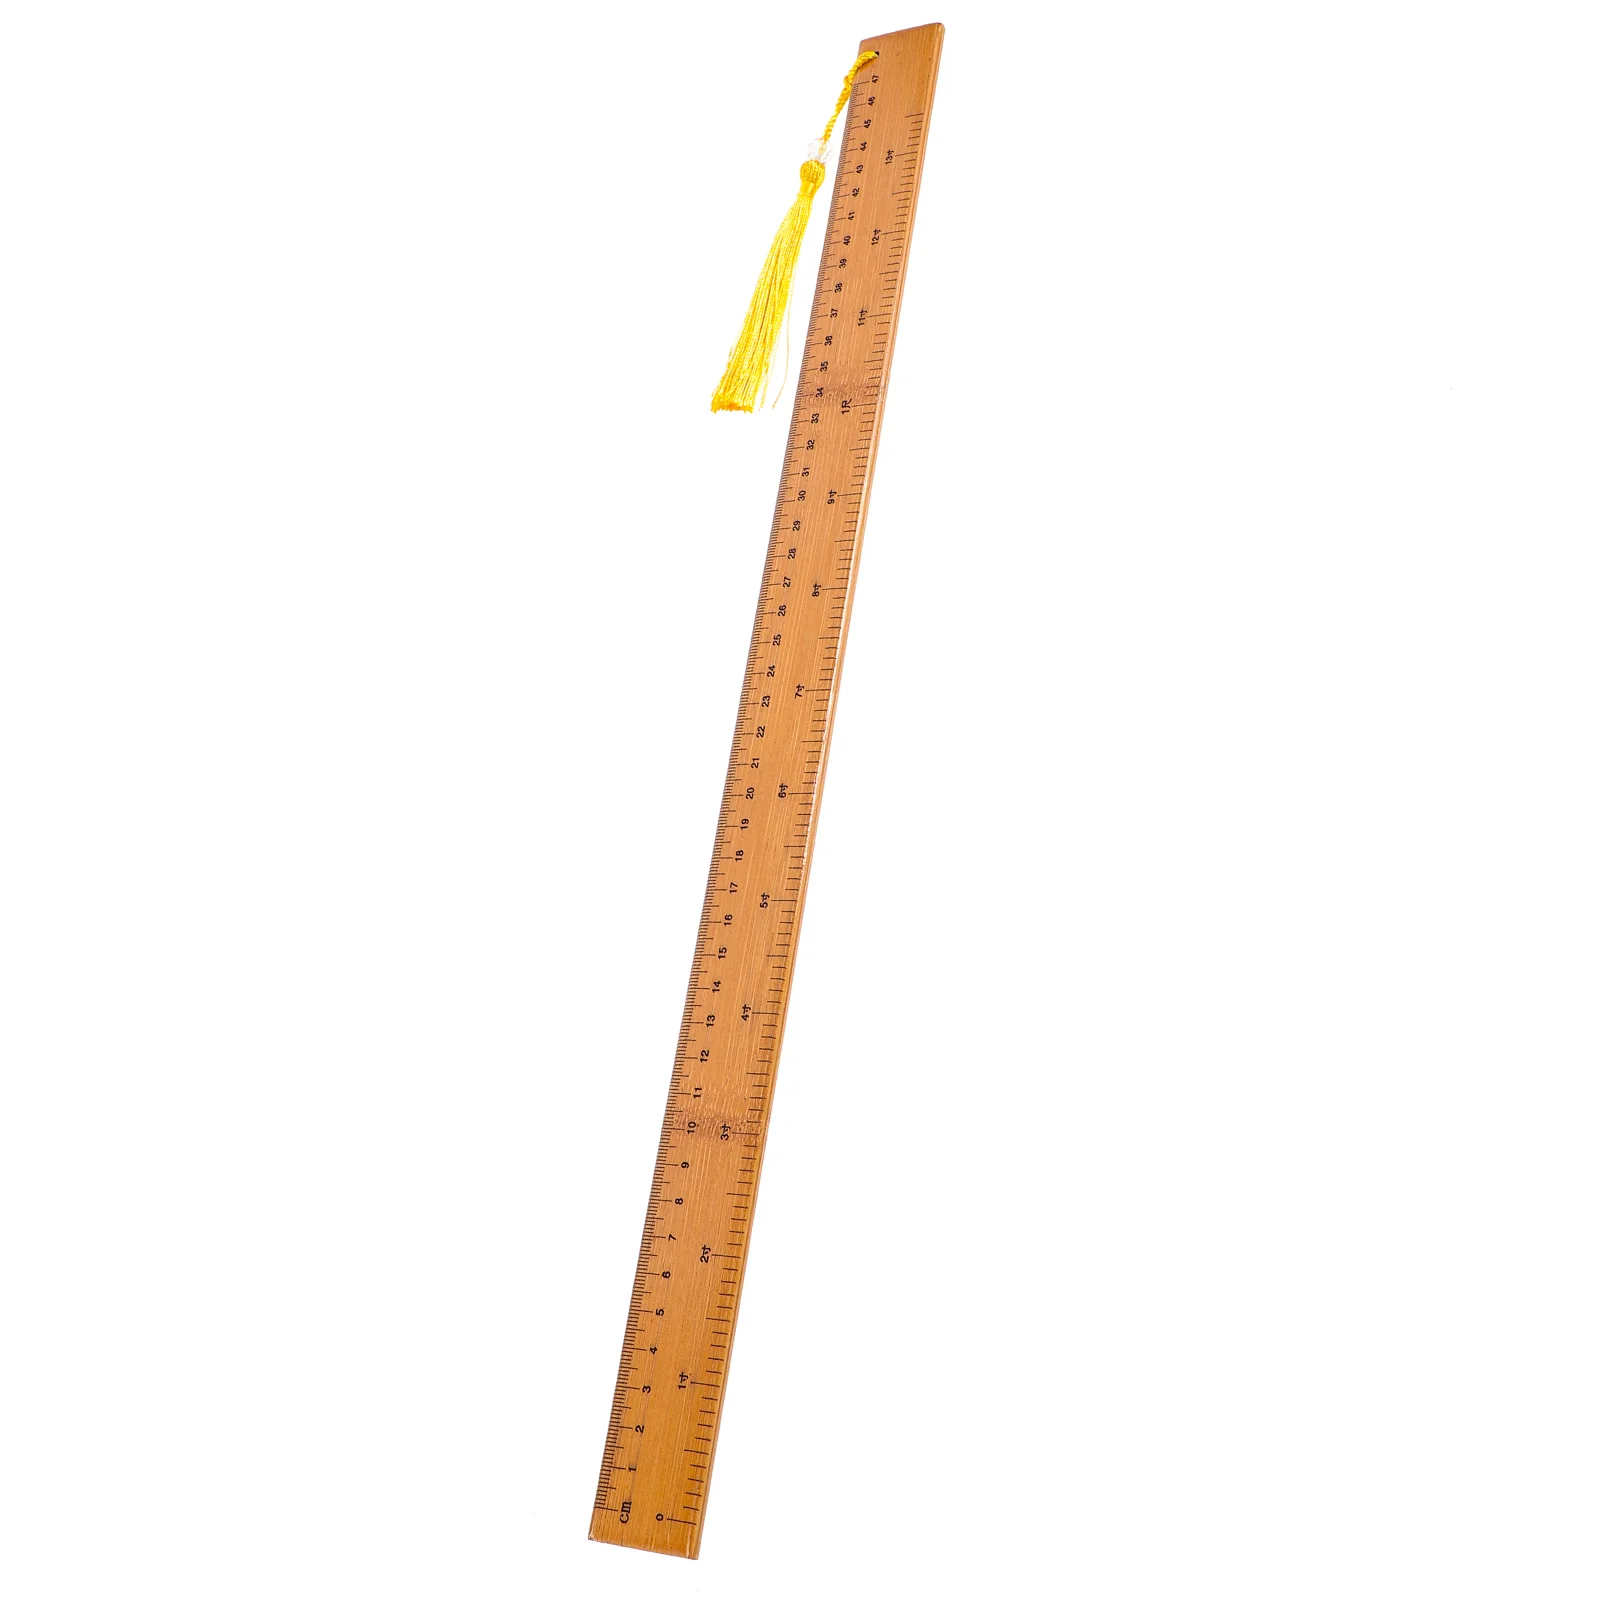 Household Straight Ruler Kids Ruler Measuring Bamboo Ruler Precise Student Ruler School Accessory Kids School Teaching Home thread pitch cutting gauge wood working tool set inch 55° metric thread gauge metric screw thread gauge home measuring tool